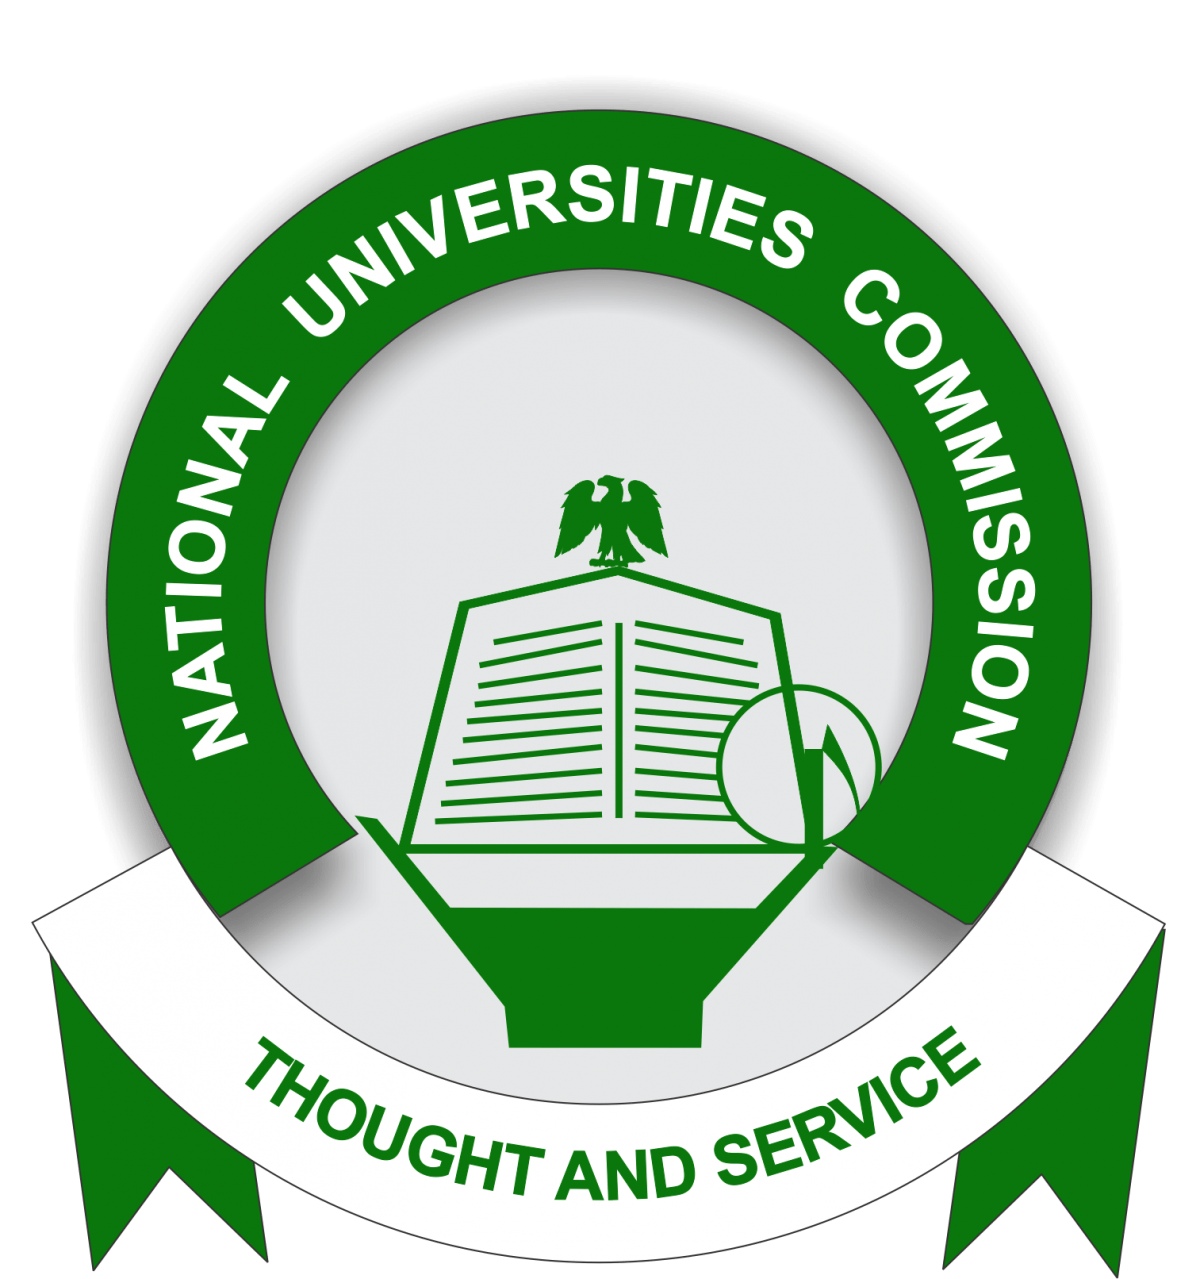 NUC Introduces B.Sc  CyberSecurity, Other Into University Curriculum